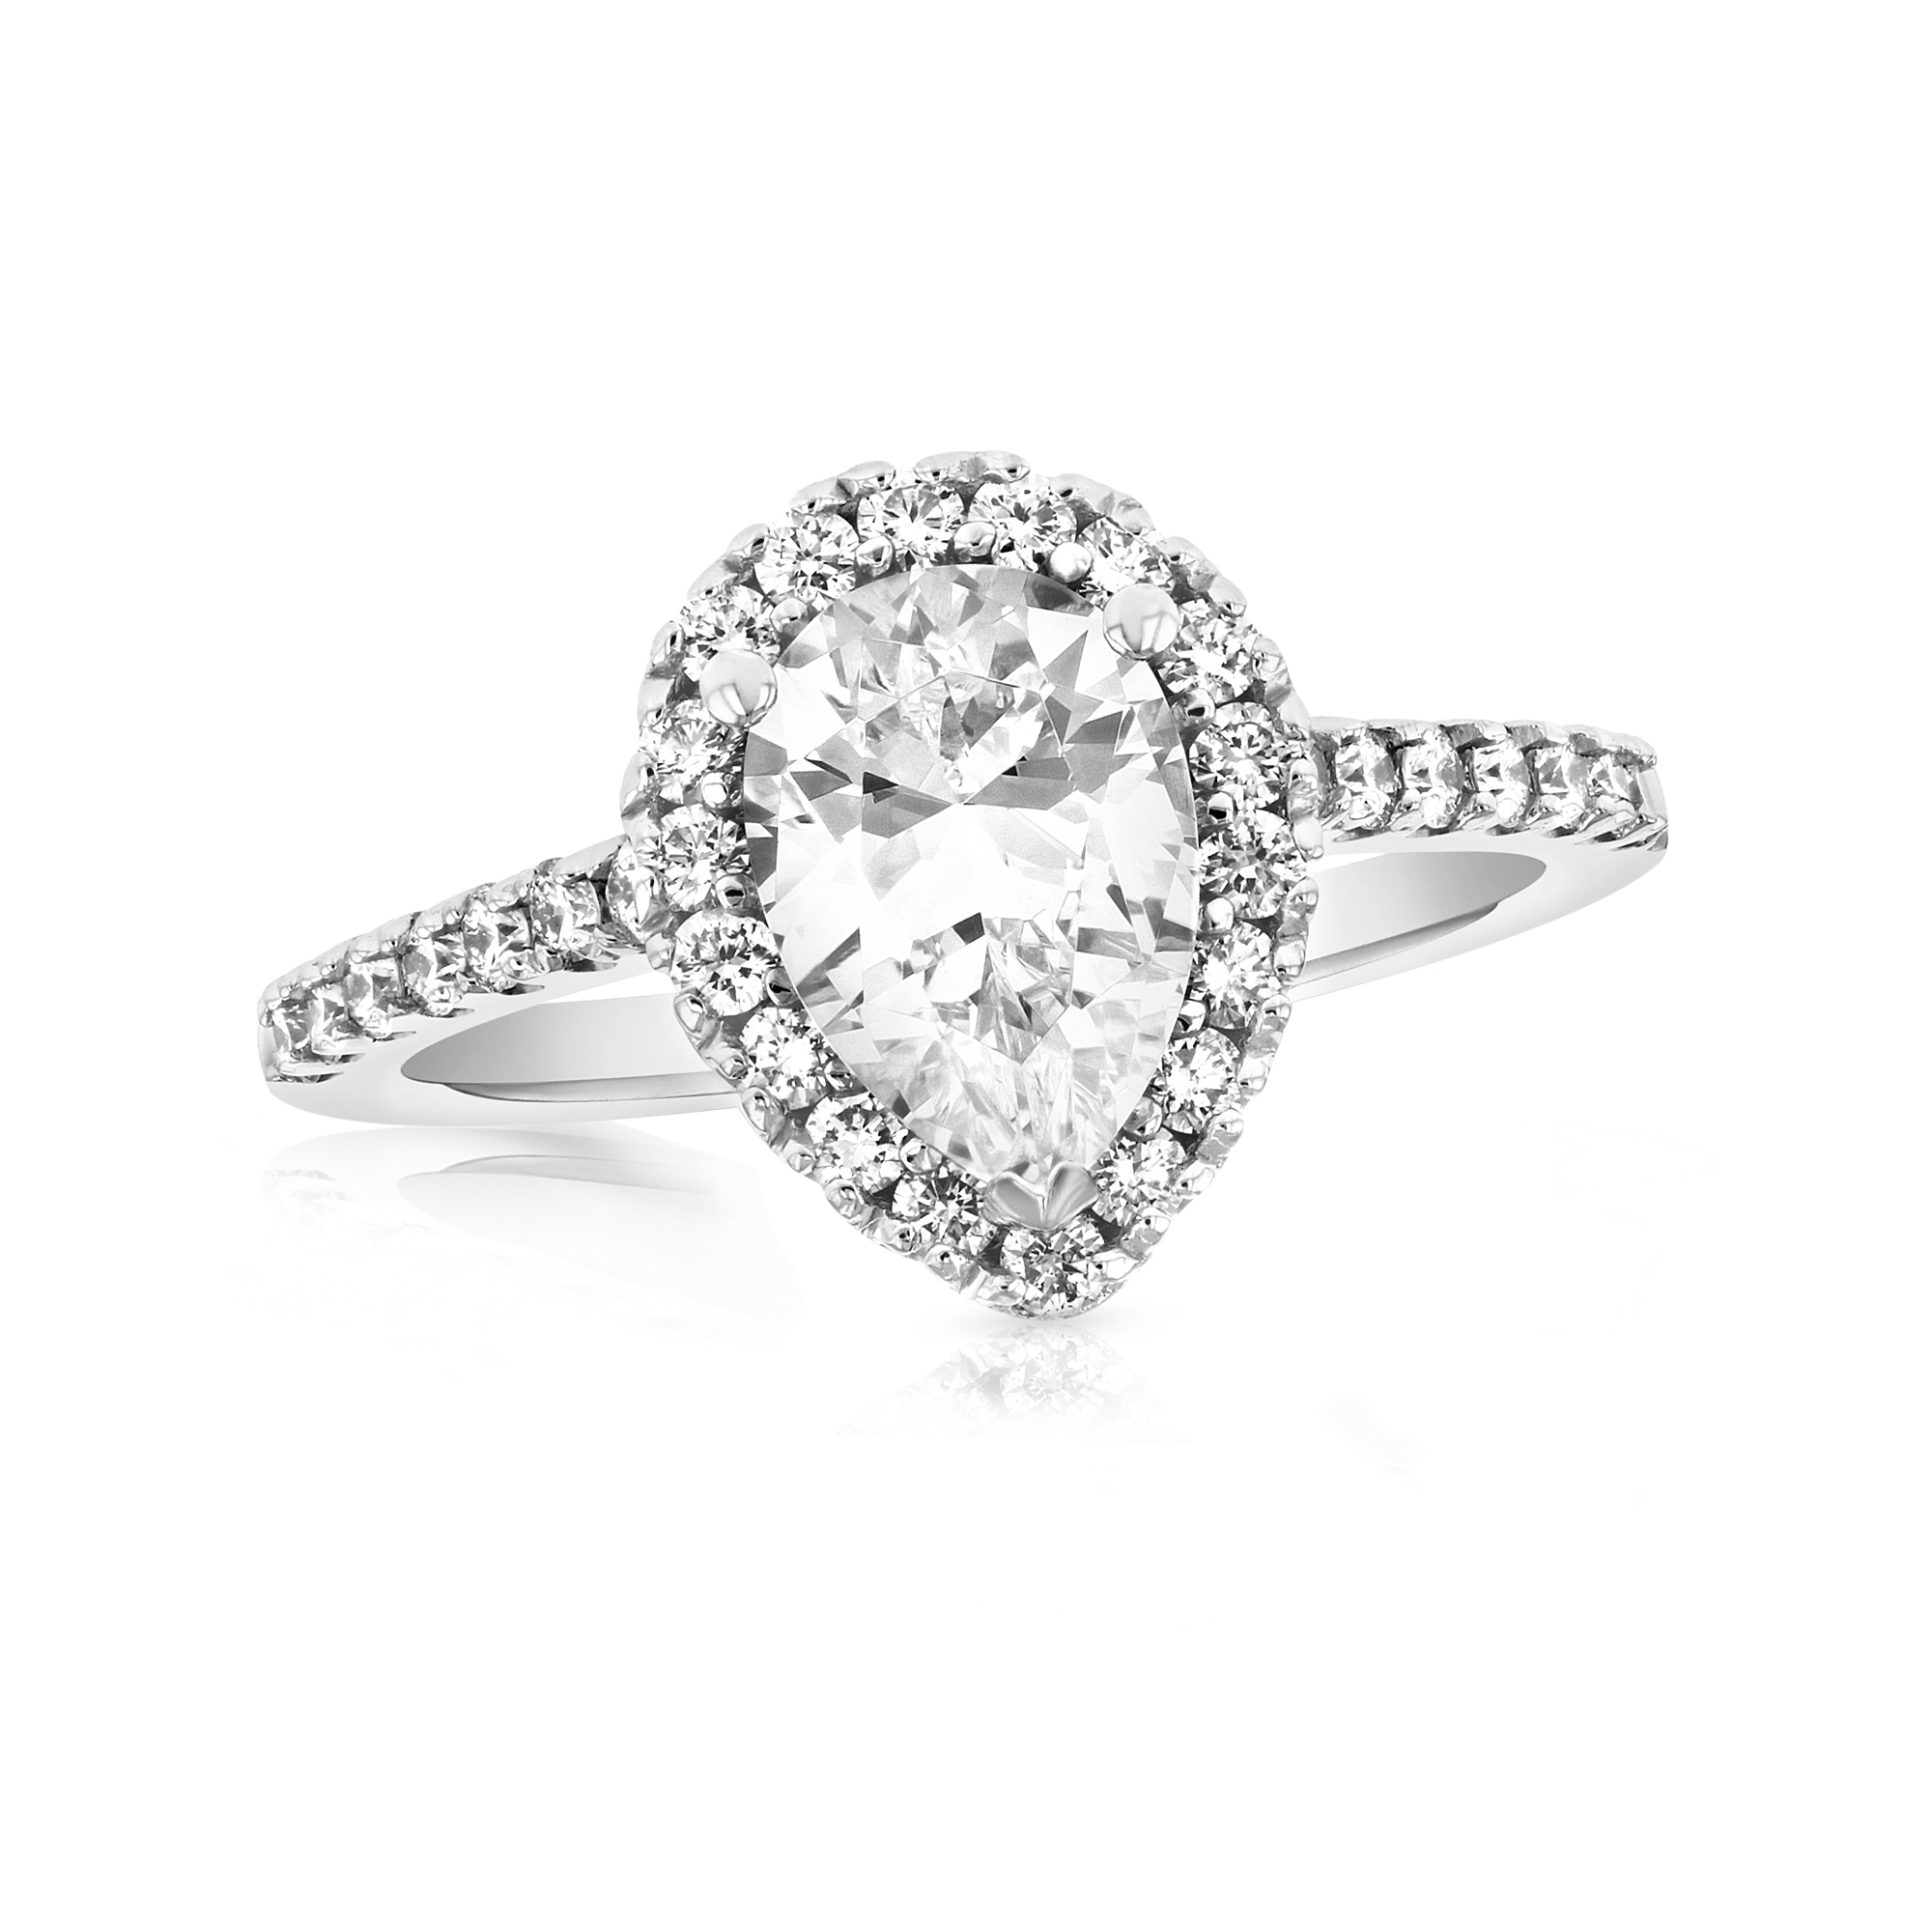 View 1.36ctw Diamond Pear Shaped Engagement Ring in 14k White Gold